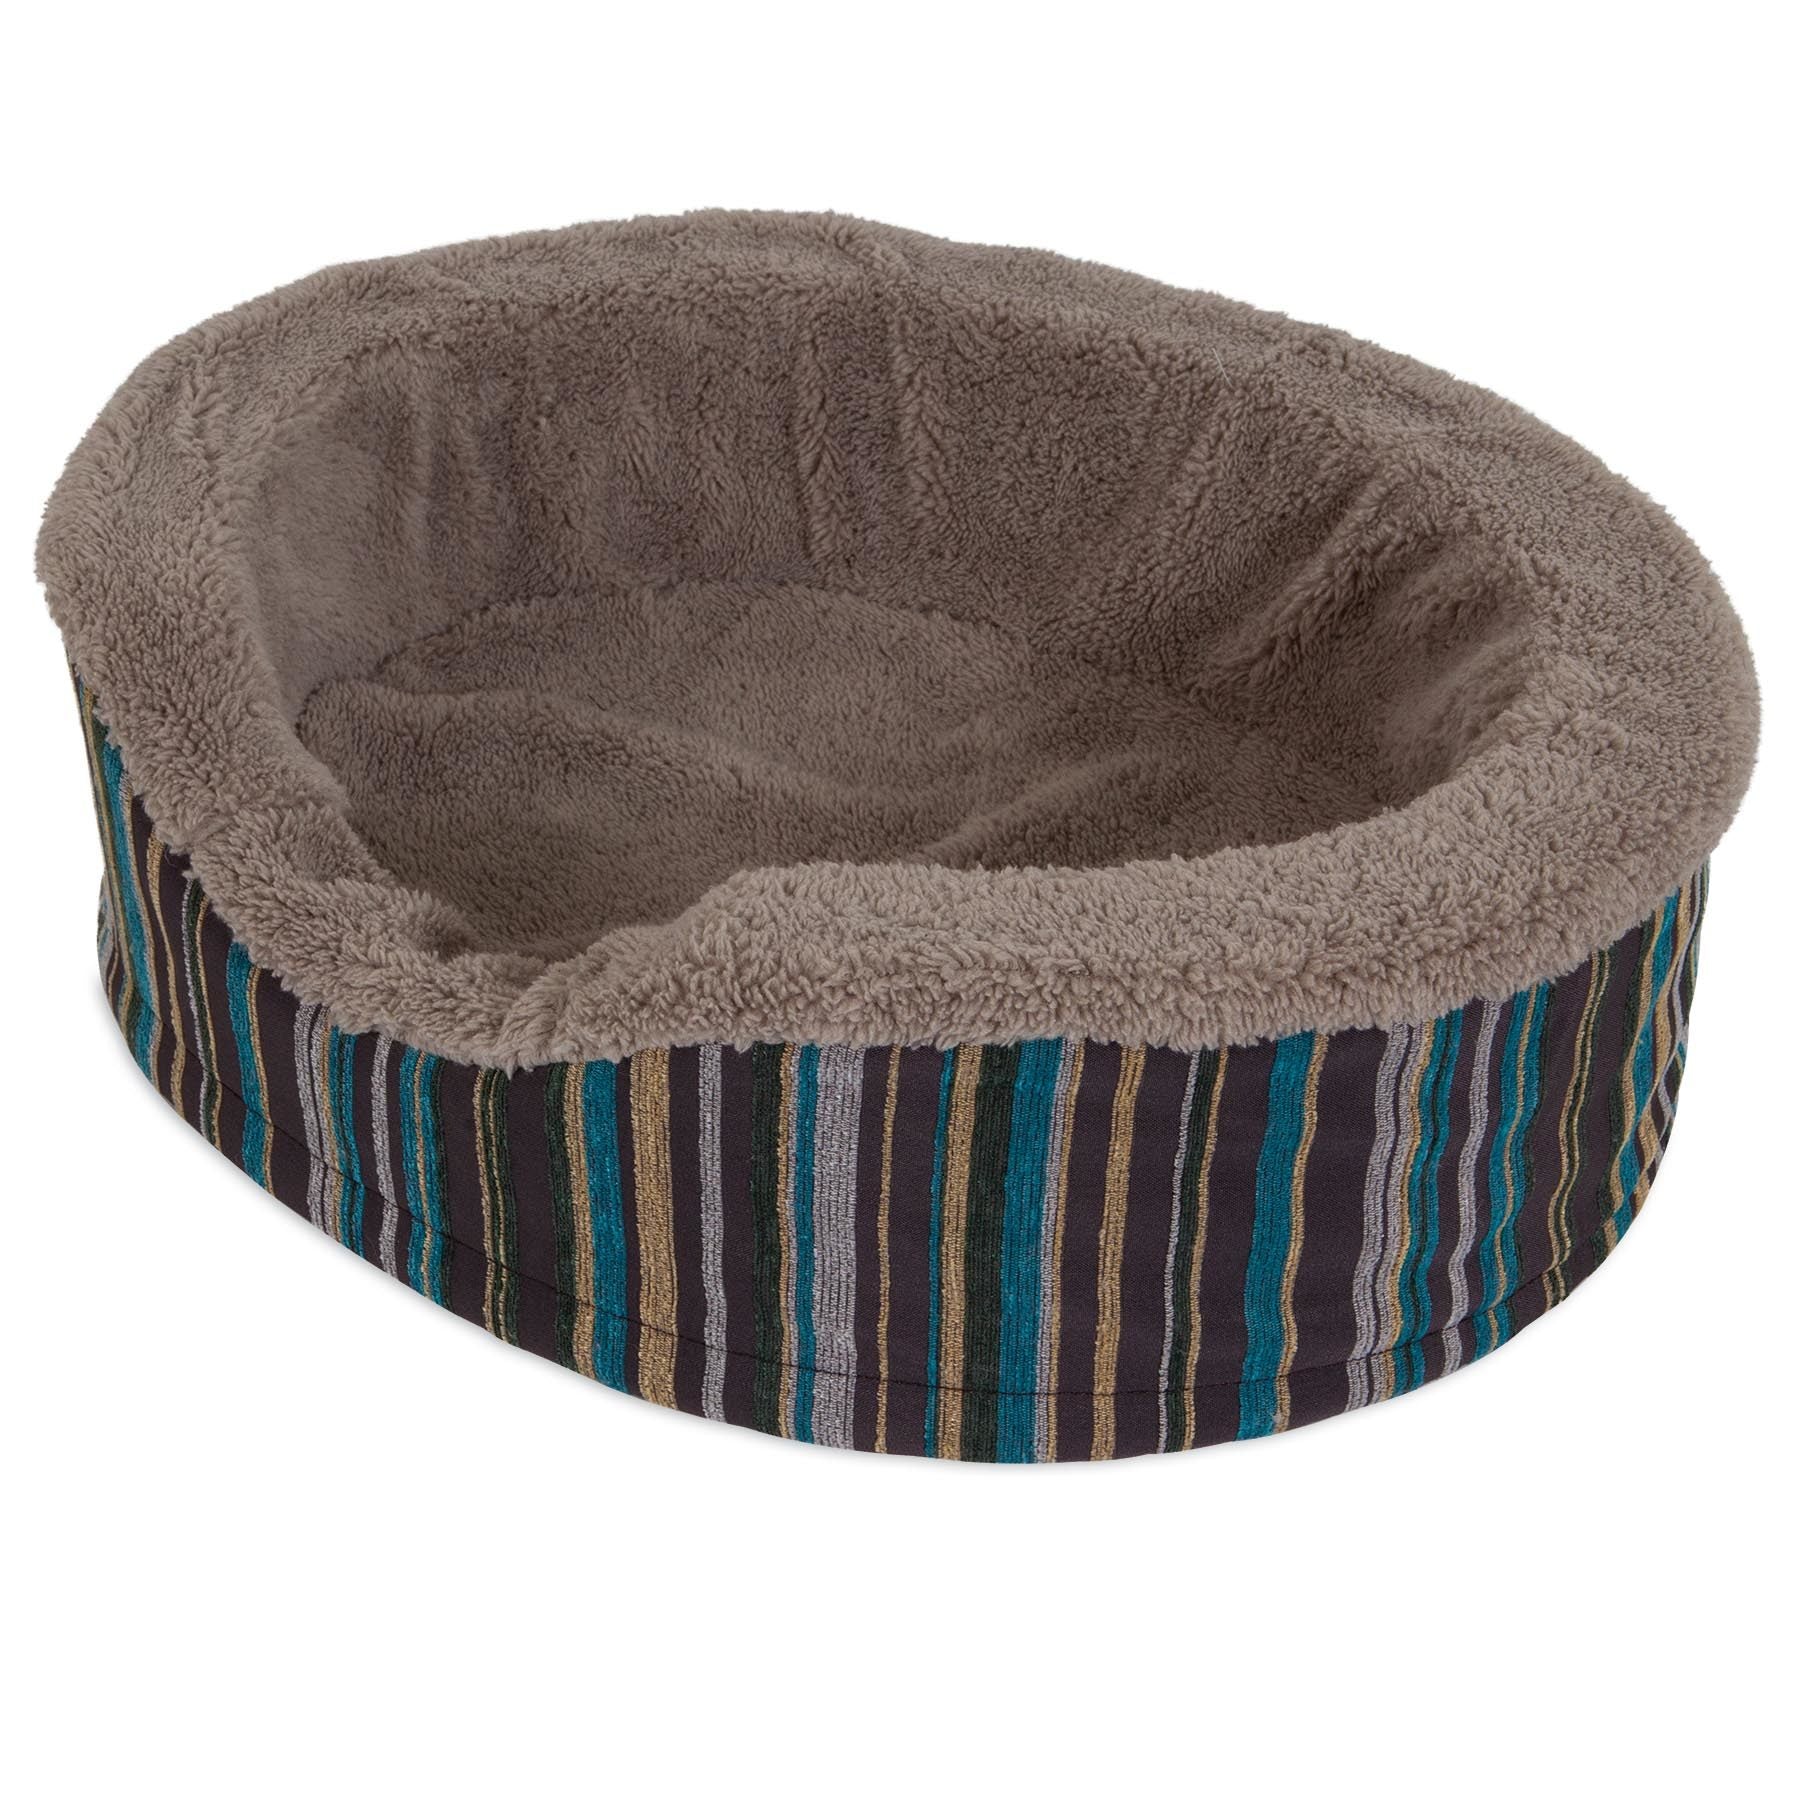 Aspen Pet Antimicrobial Deluxe Oval Pet Bed